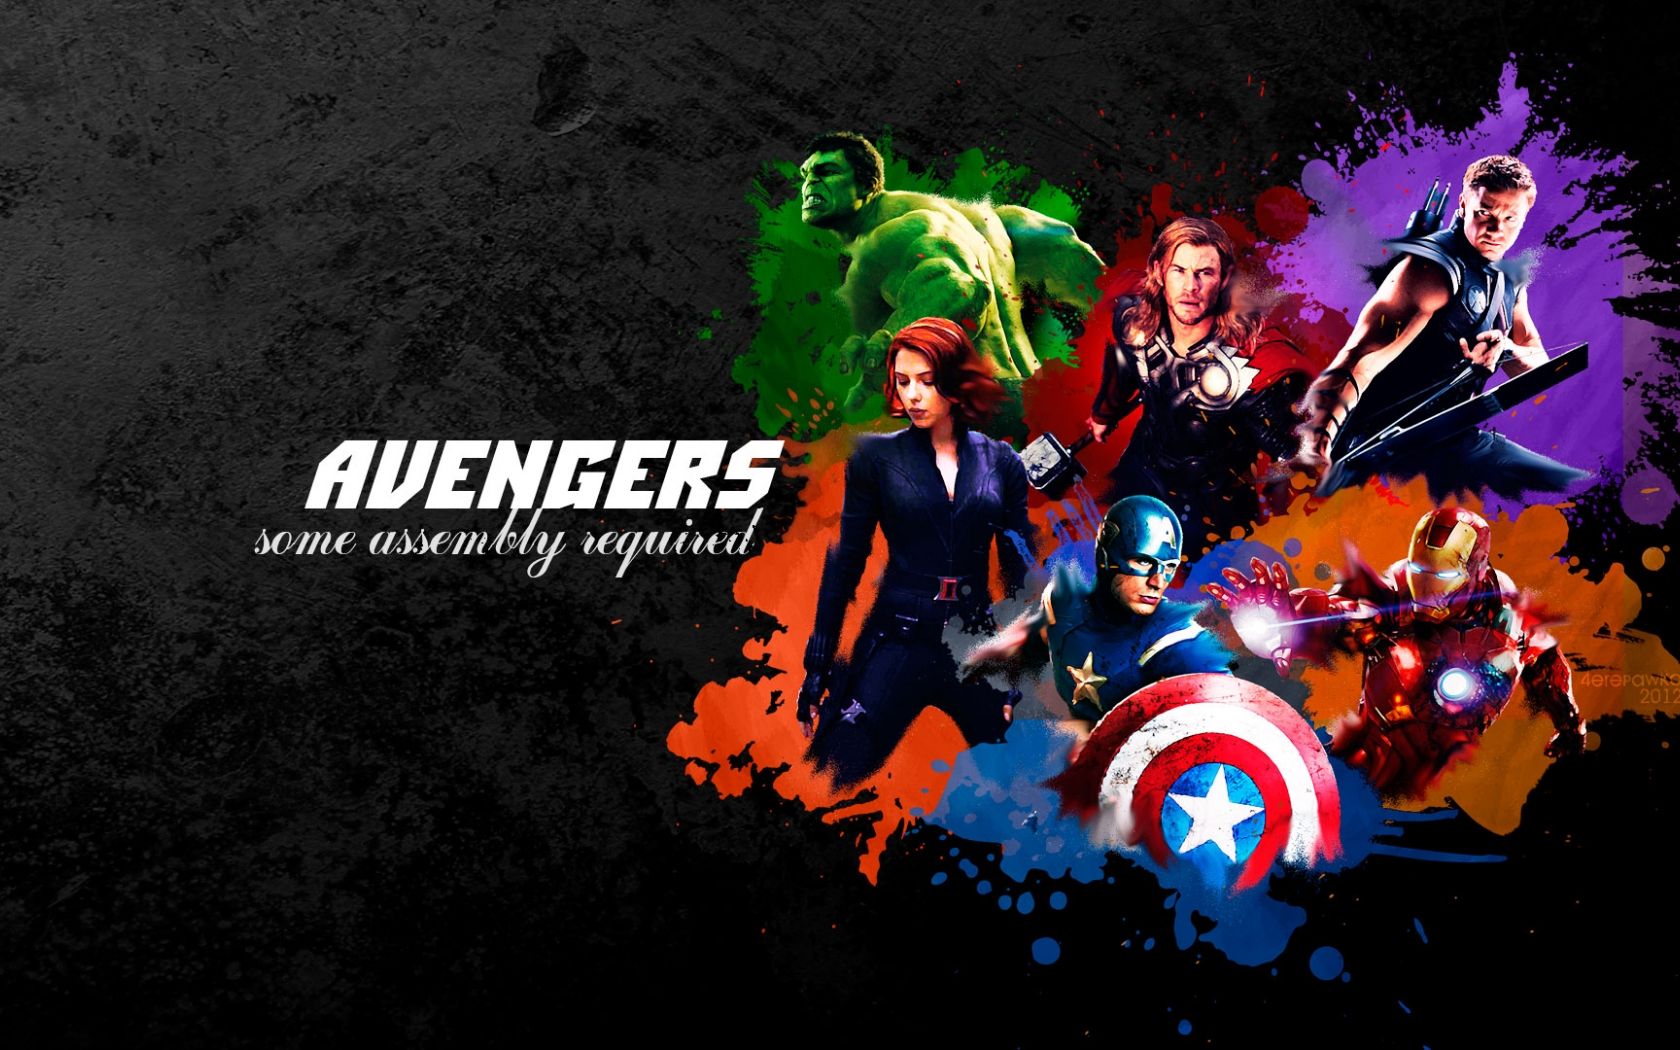 Free download The Avengers Wallpaper For Deskx1080 Movie Background [1920x1080] for your Desktop, Mobile & Tablet. Explore Avengers Desktop Wallpaper HD. Avengers Movie Wallpaper, Marvel Avengers Desktop Wallpaper